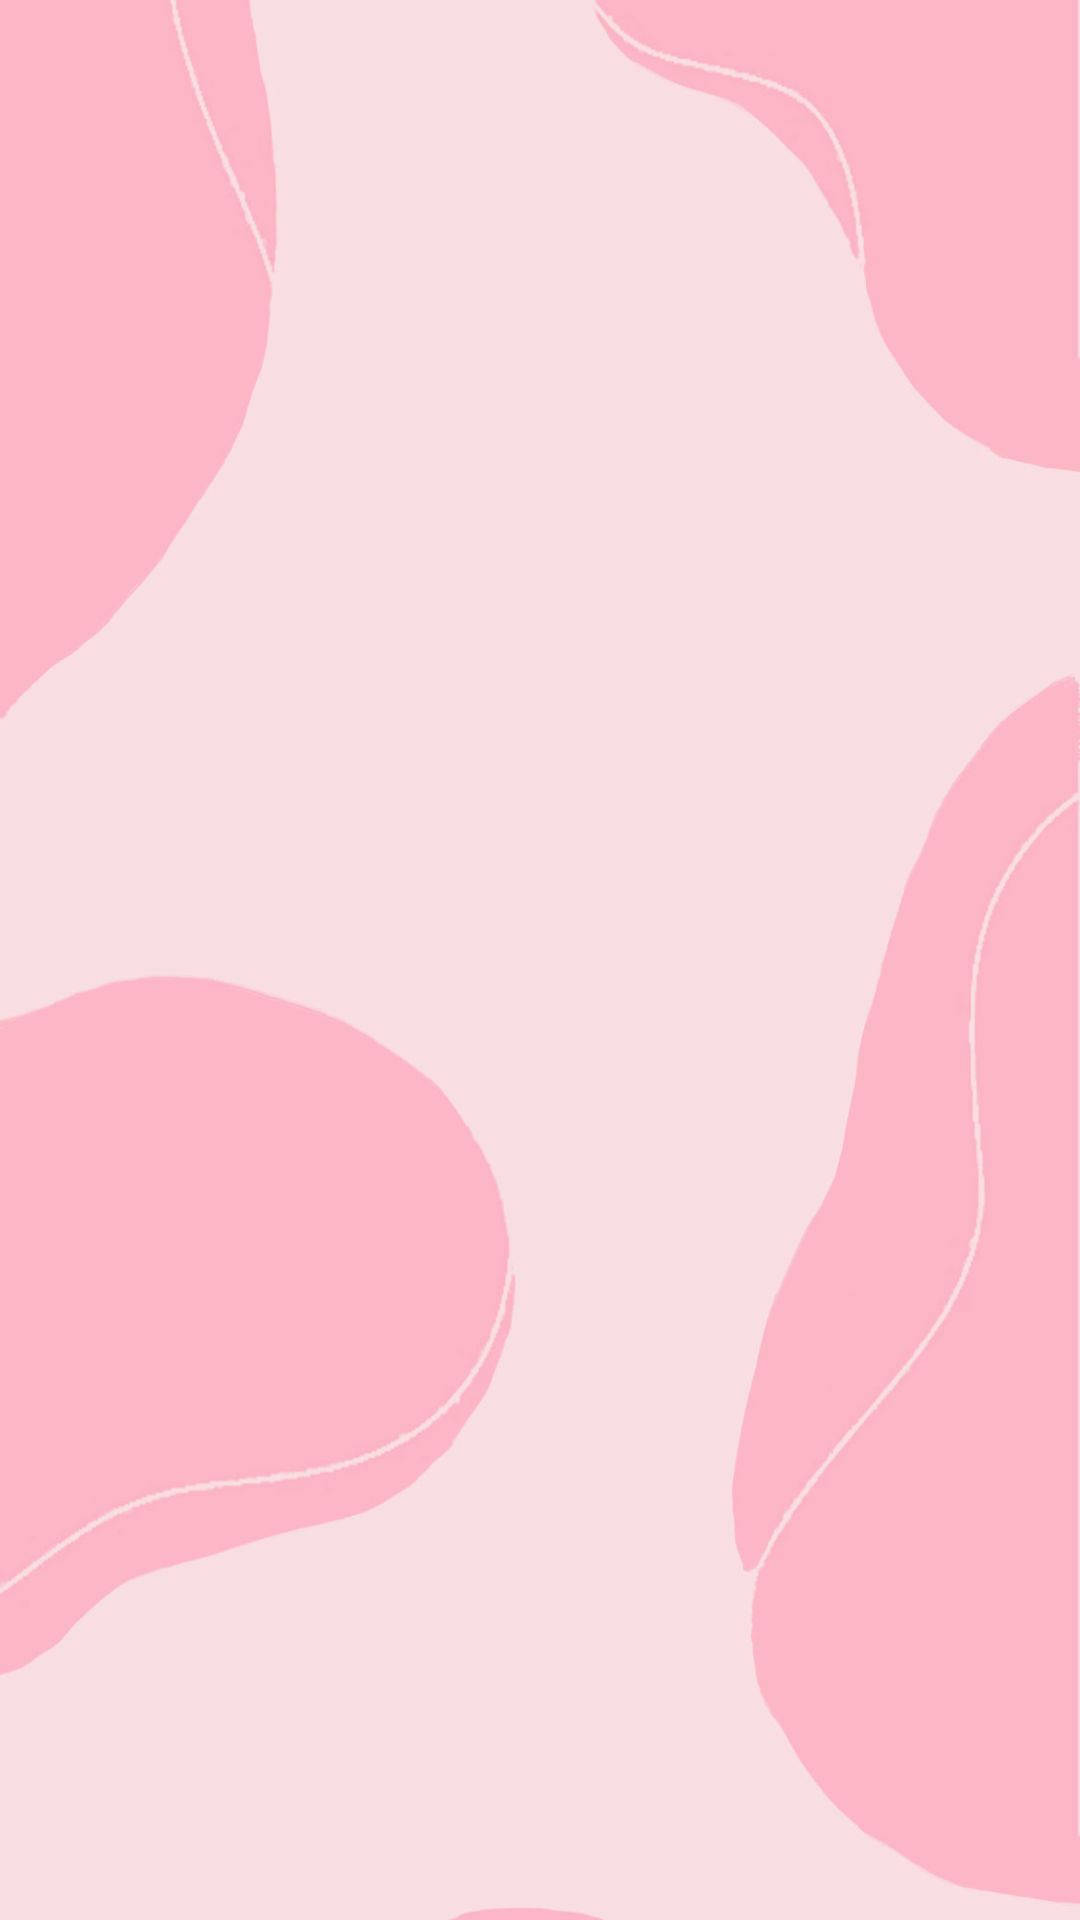 Aesthetic Pink Abstract Picture